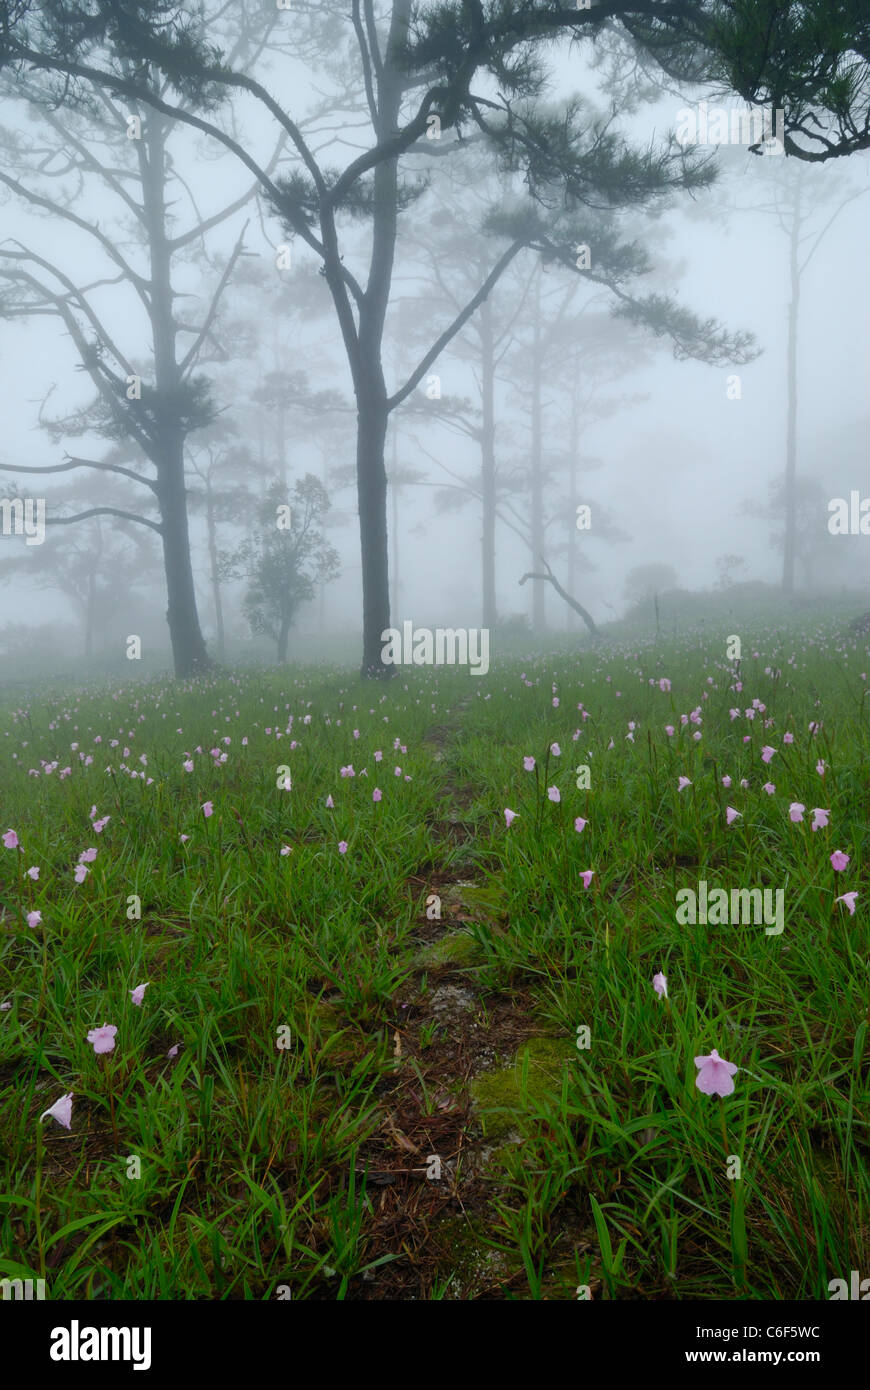 Boloven Plateau wild flower field in the mist, Nong Luang, Dong Hua Sao National Biodiversity Conservation Area, Champasak, Laos Stock Photo